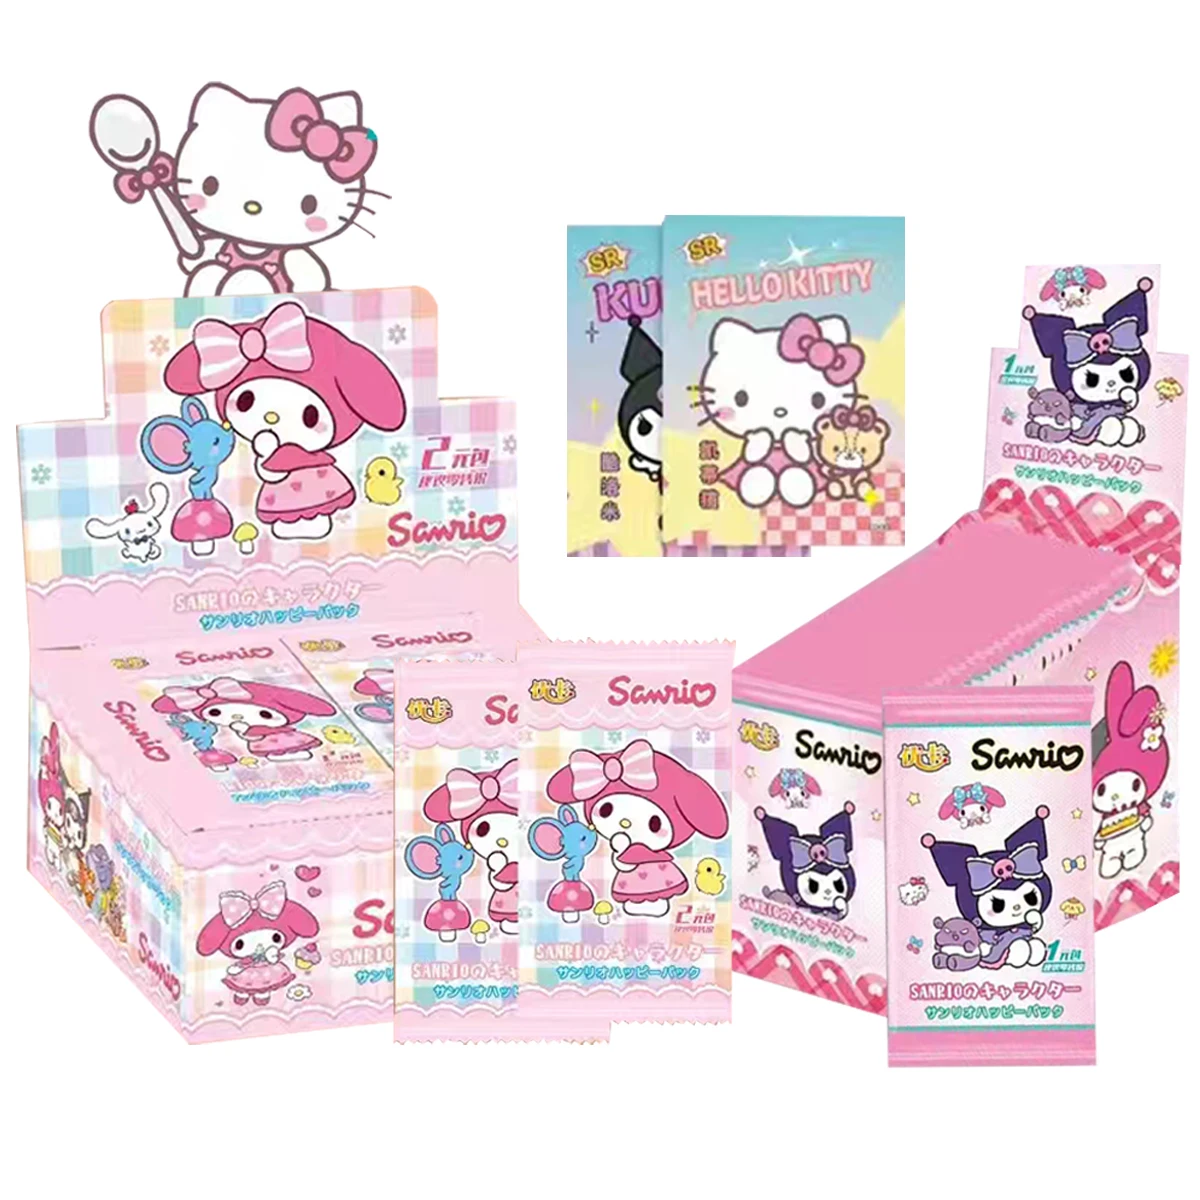 

Collection Cards Hello Kitty 30 Packs Sanrio Kuromi Cards Melody Trading Card Game My Cartoon Cute Toy Hangyodon Gift Wholesale